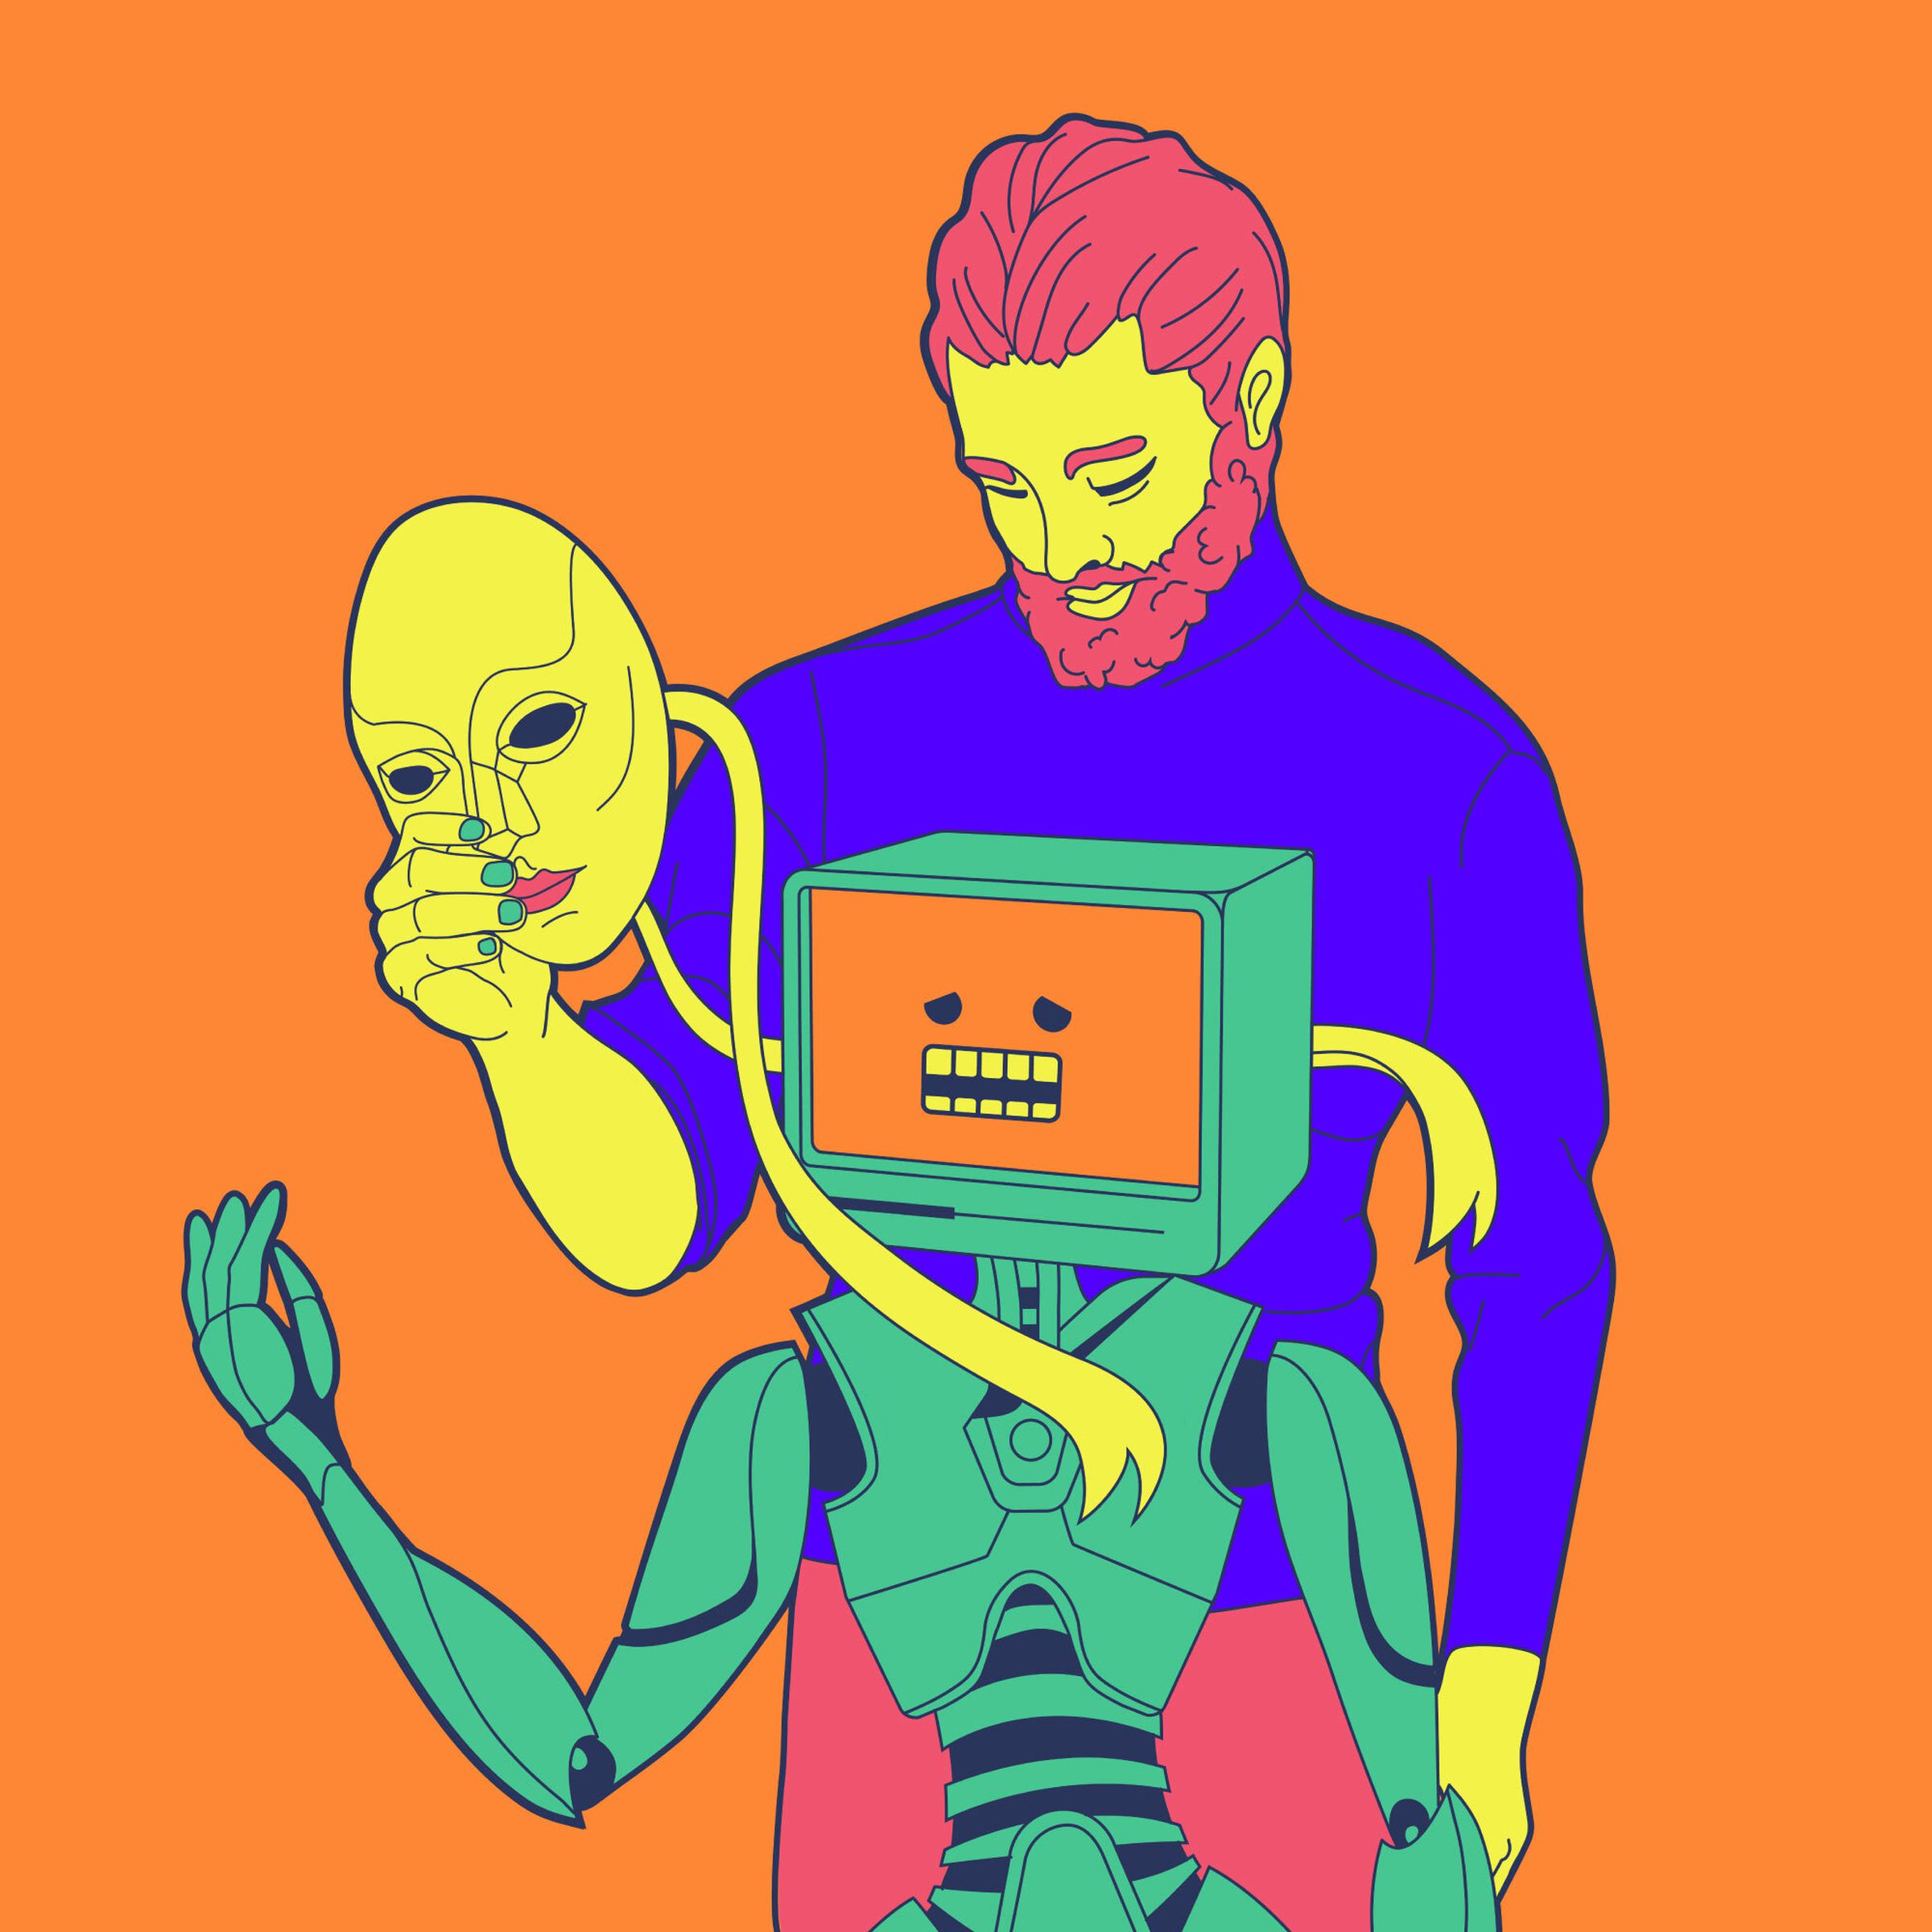 An illustration of a man pulling a theater mask off a humanoid body to reveal a computer screen.